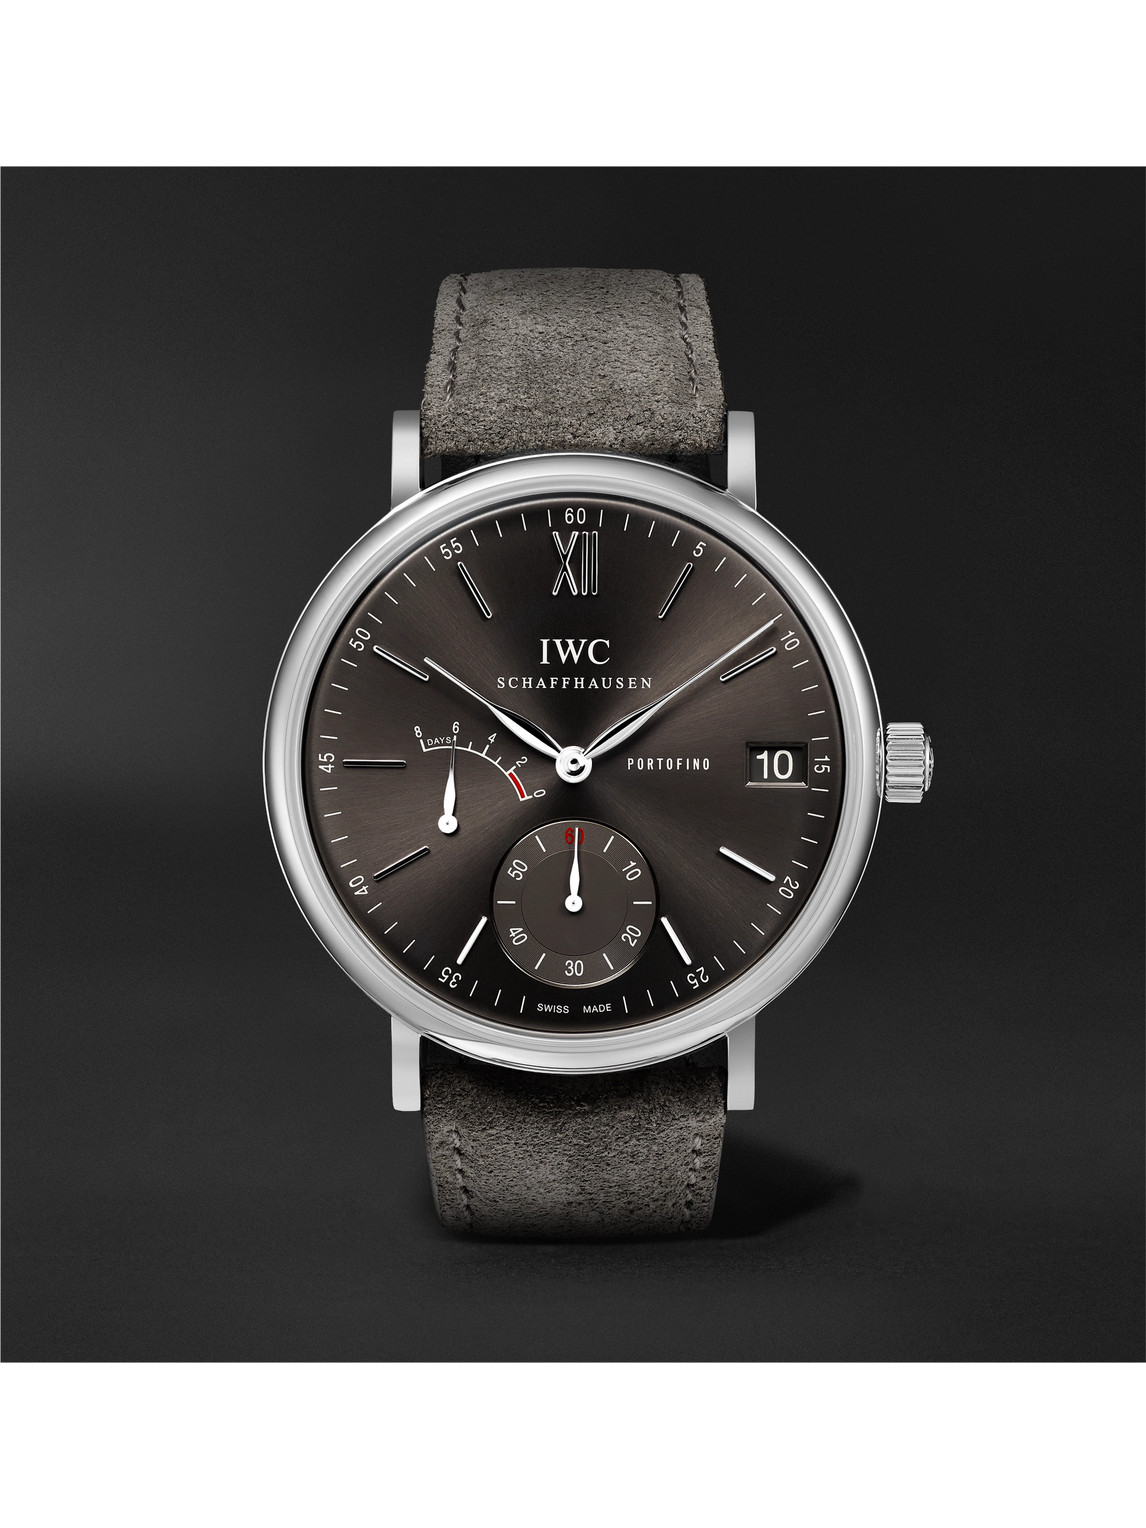 Portofino Hand-Wound Eight Days 45mm Stainless Steel and Suede Watch, Ref. No. IWIW510115